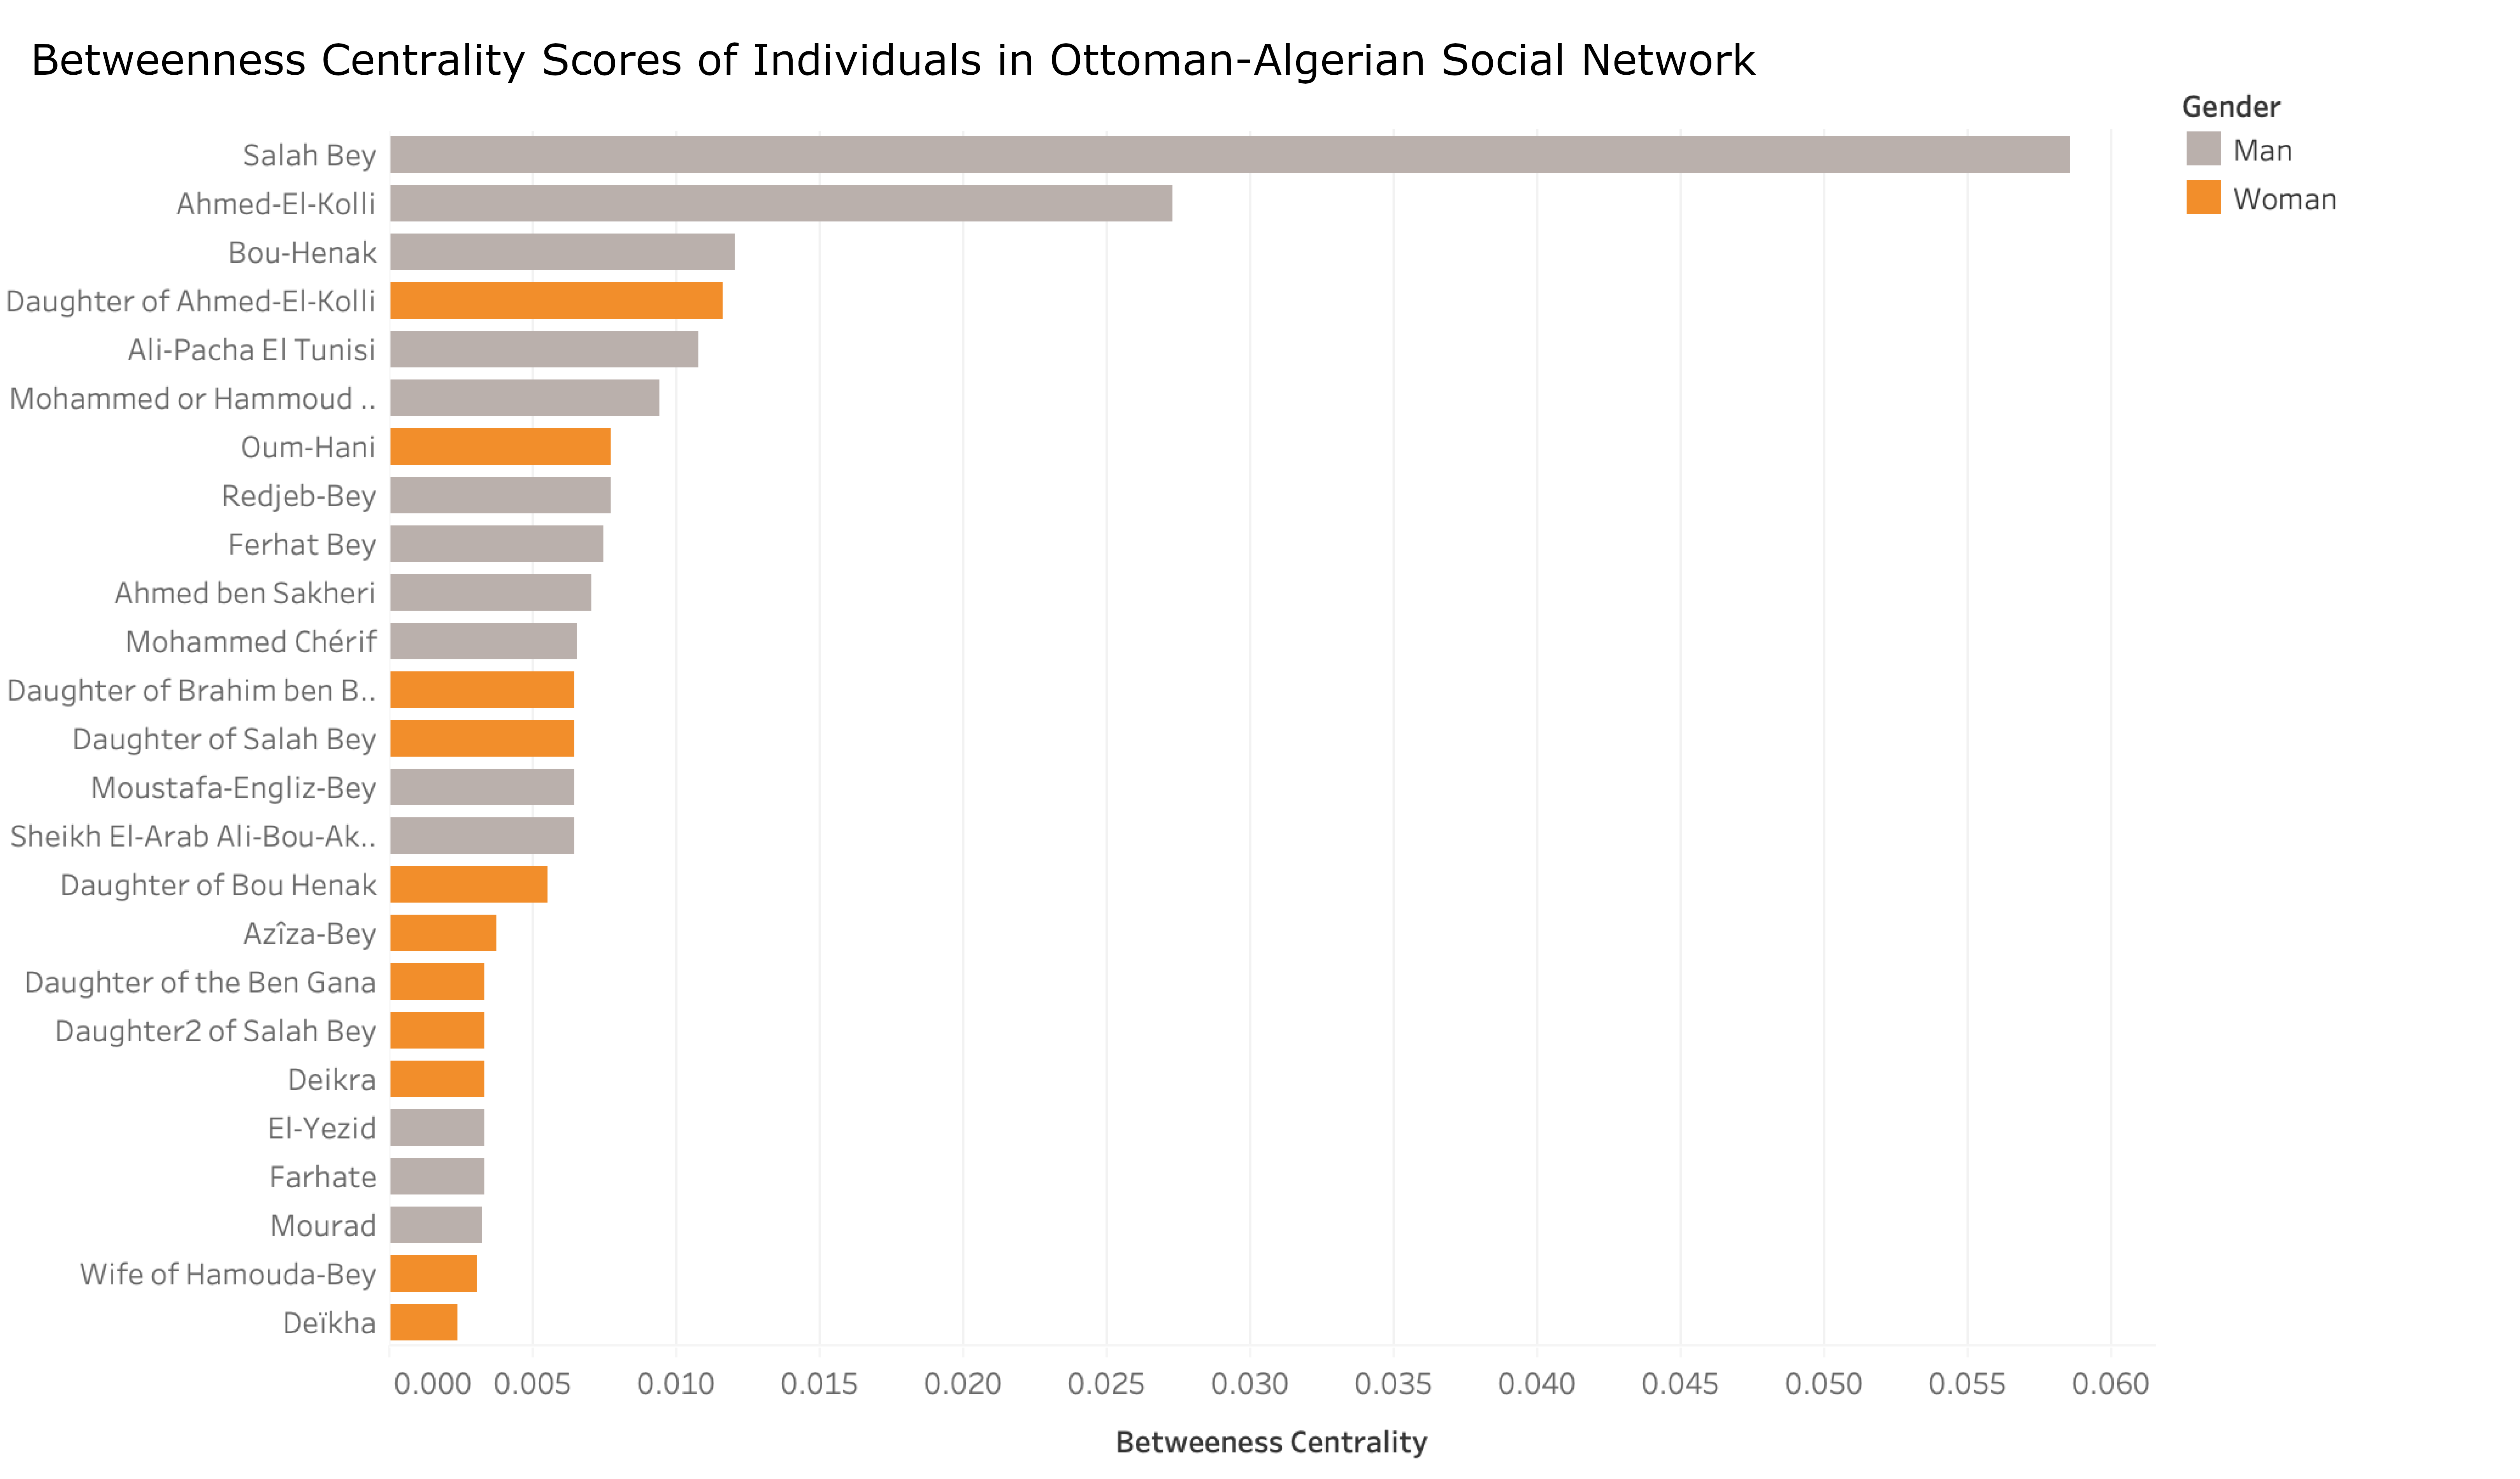 Horizontal bar graph, showing the betweeeness centrality scores for individuals in the Ottoman-Algerian Social Network.